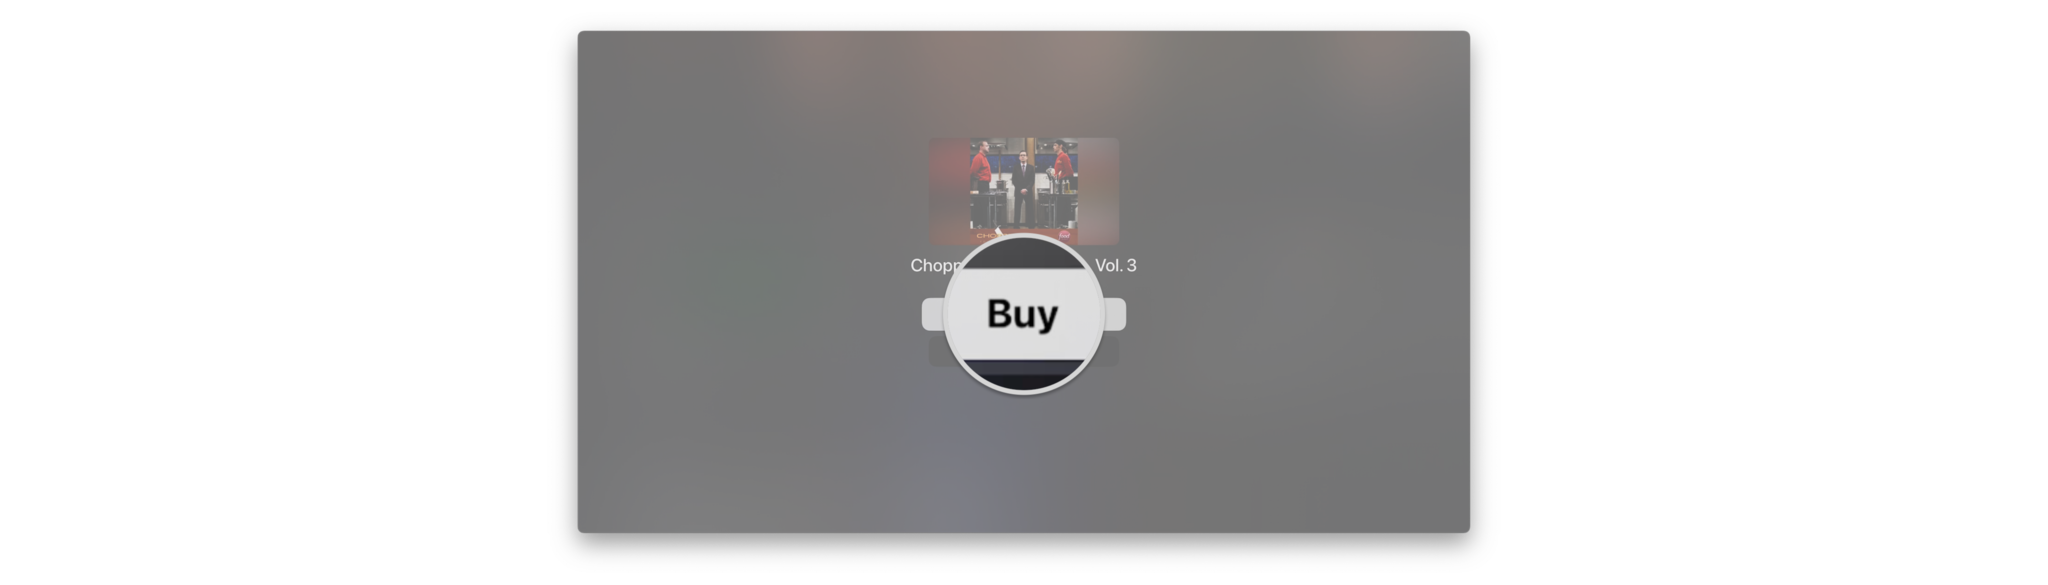 How to buy tv shows in the Apple TV app on Apple TV by showing steps: Click Buy